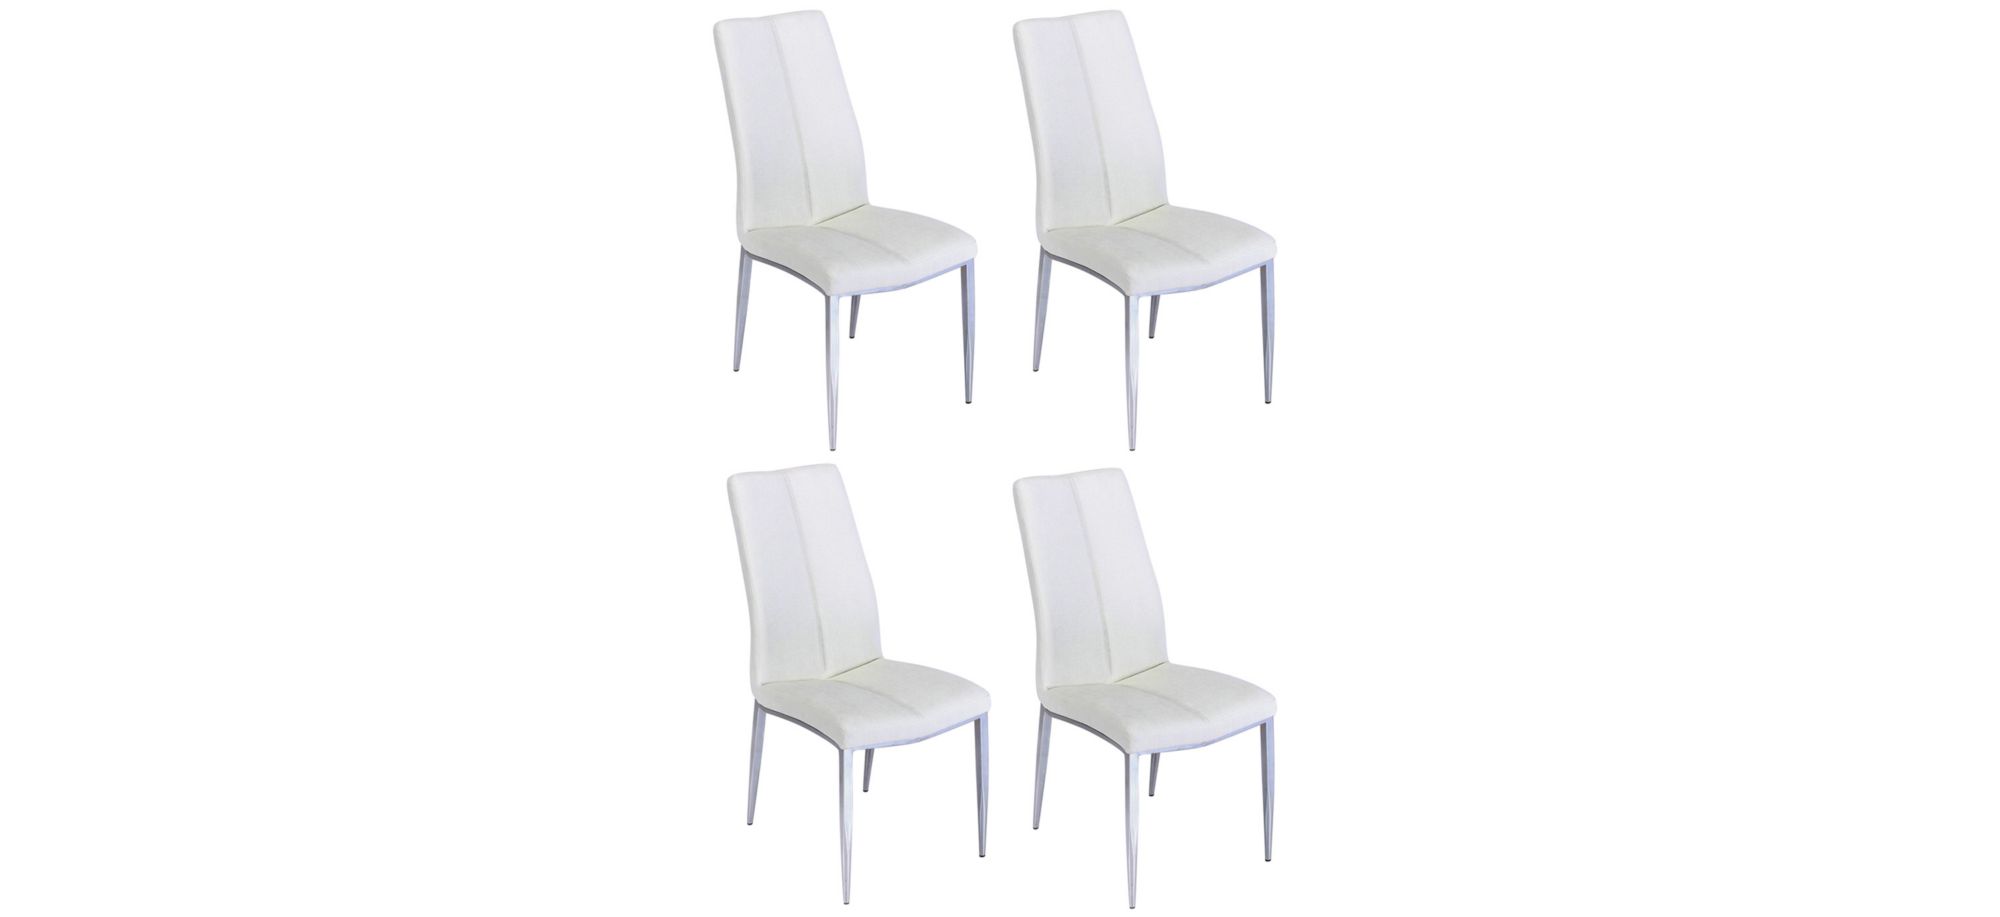 Staci Dining Chairs - Set of 4 in White by Chintaly Imports